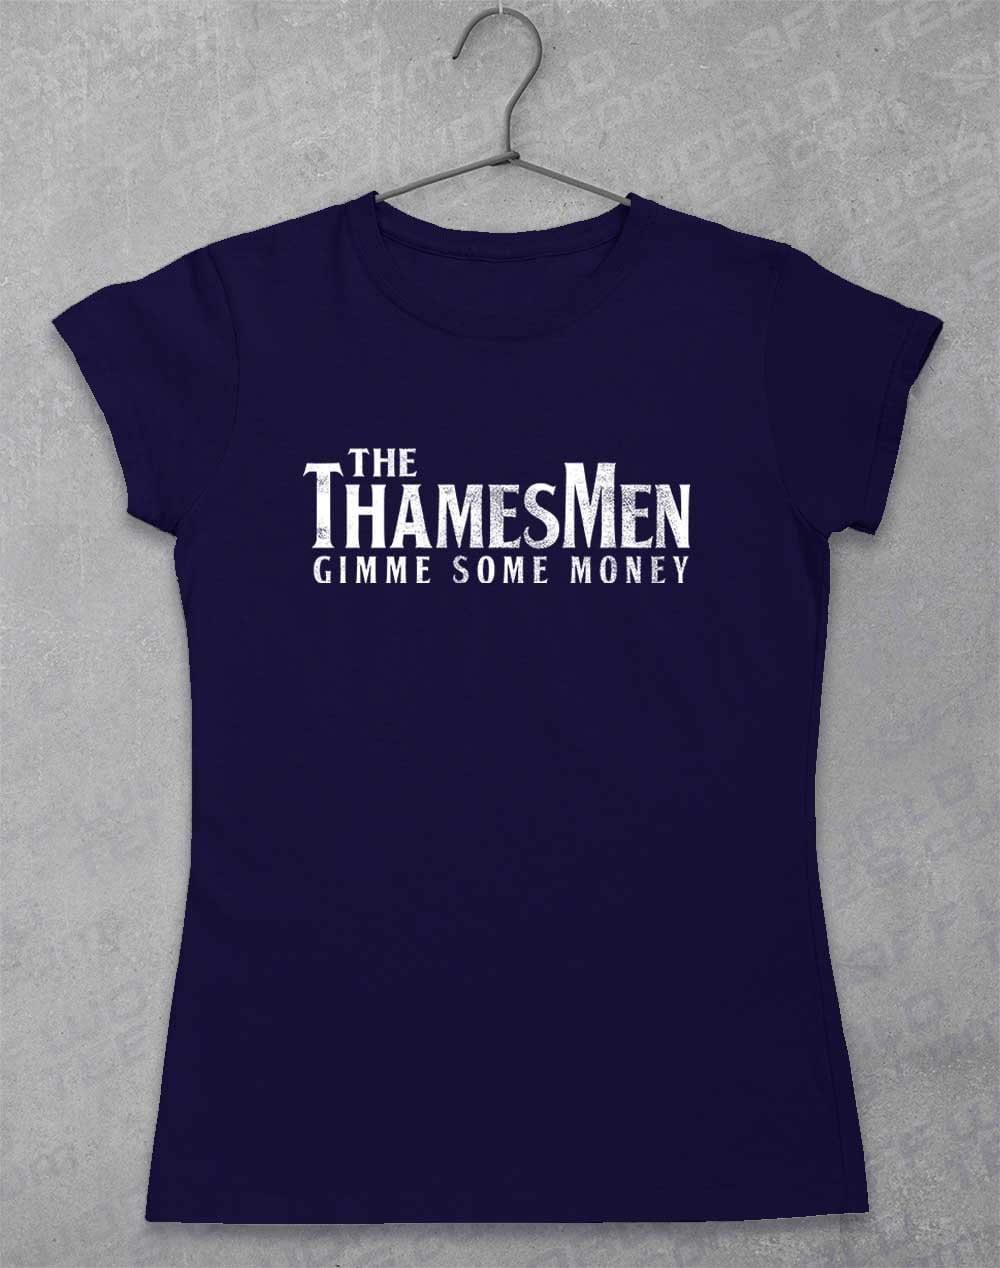 The Thamesmen Gimme Some Money Womens T-Shirt 8-10 / Navy  - Off World Tees